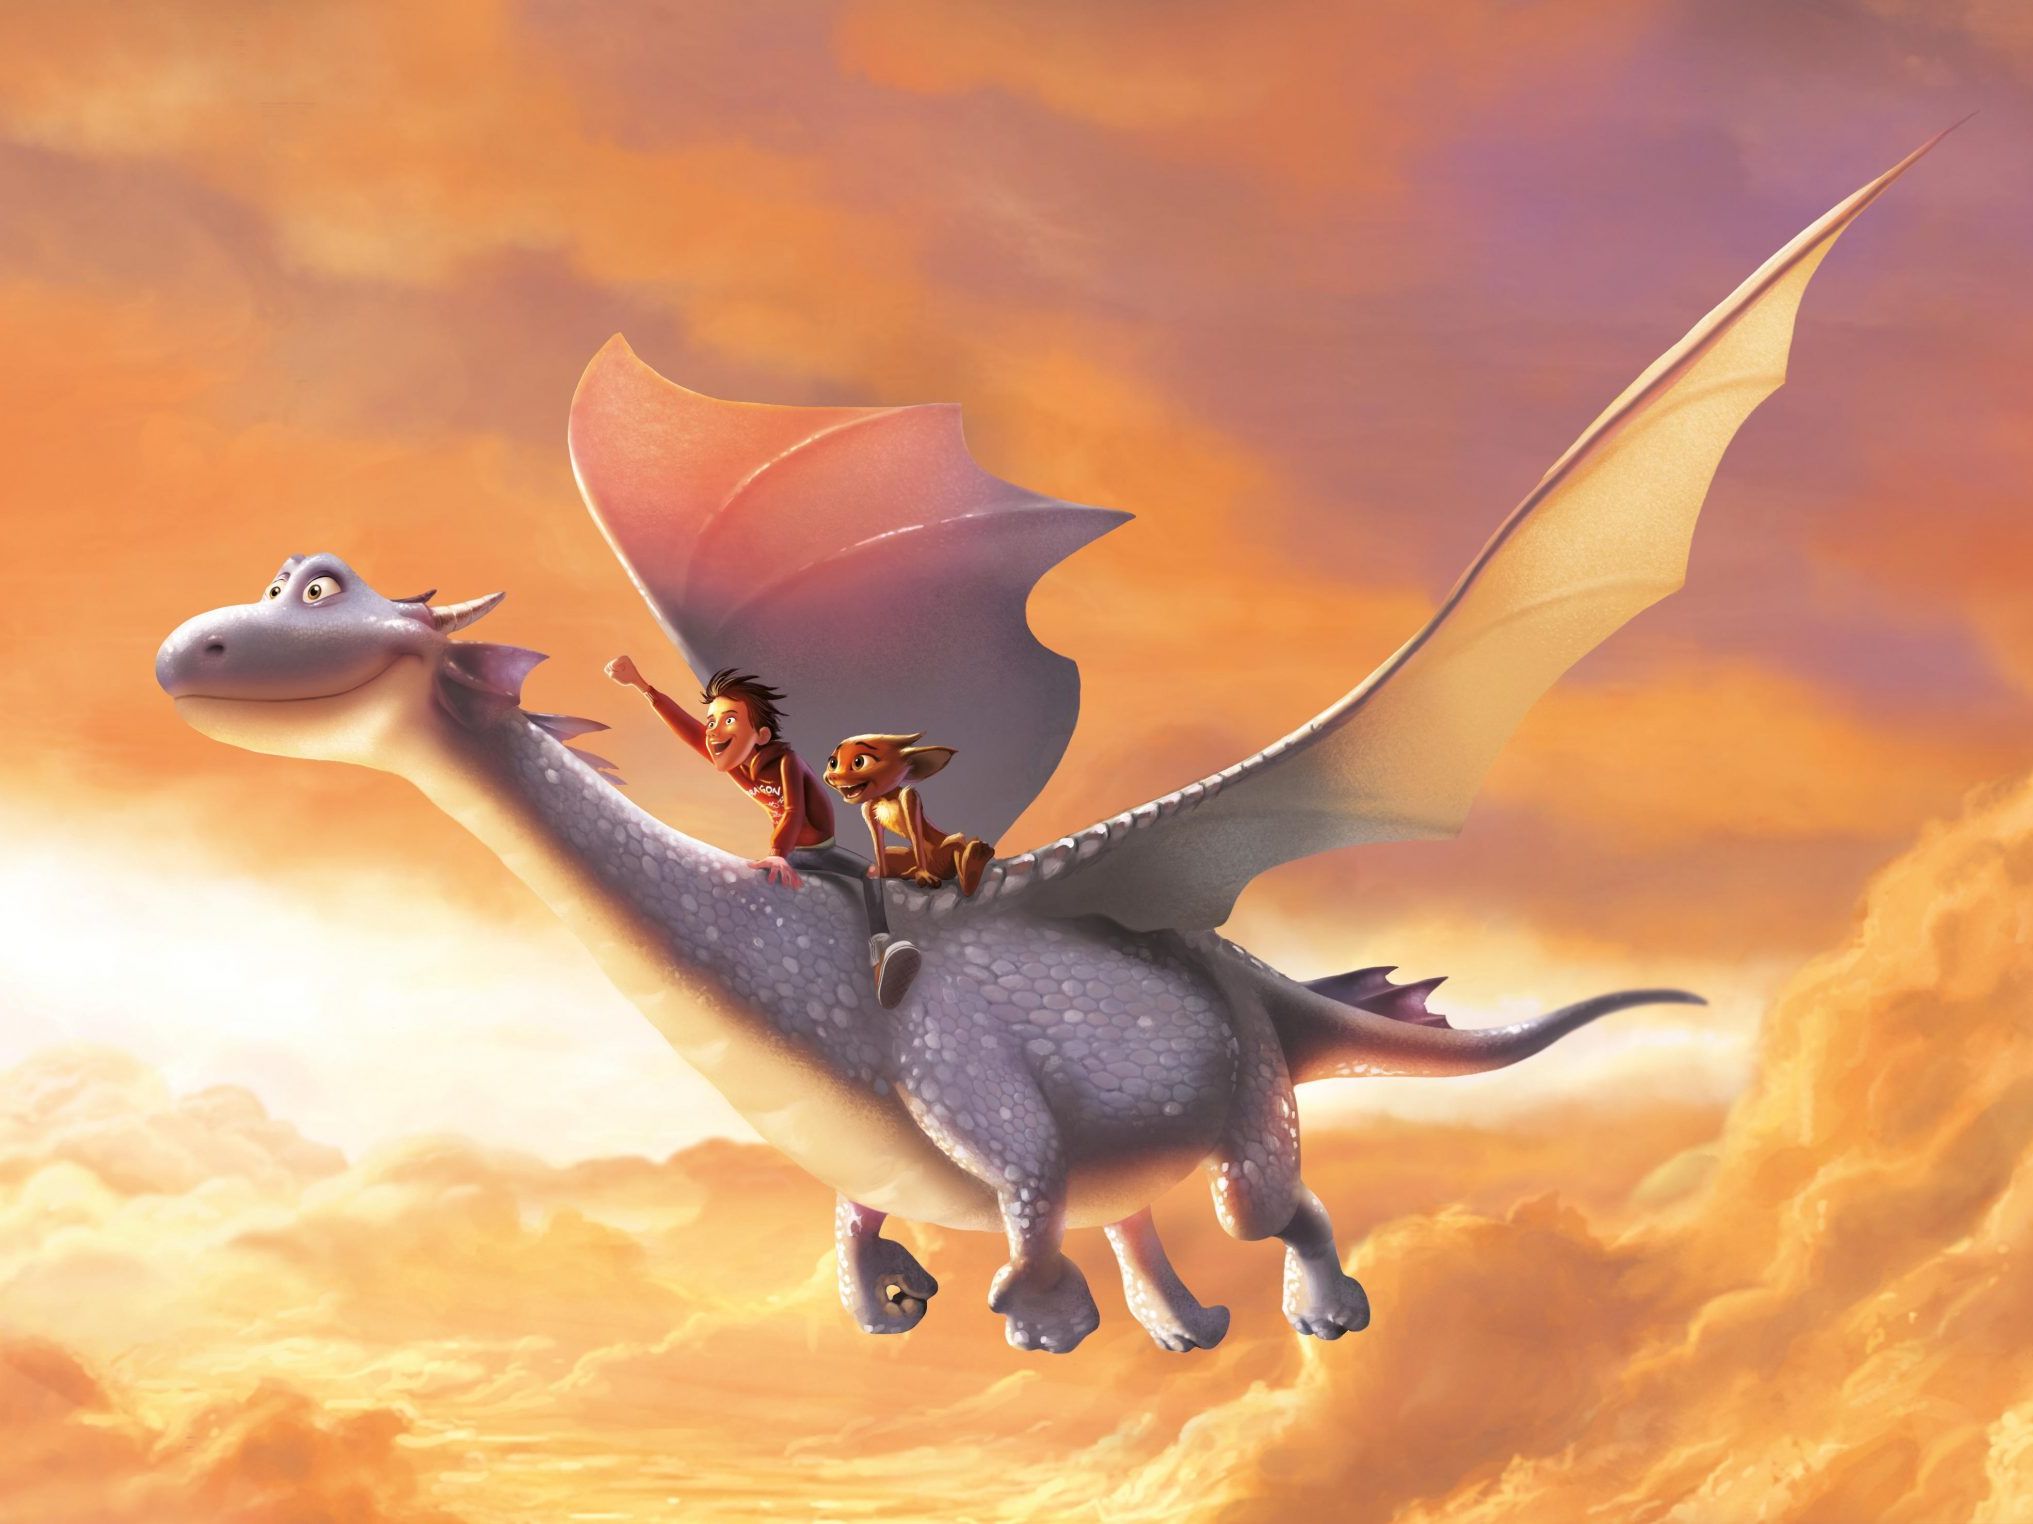 What is Firedrake the Silver Dragon about